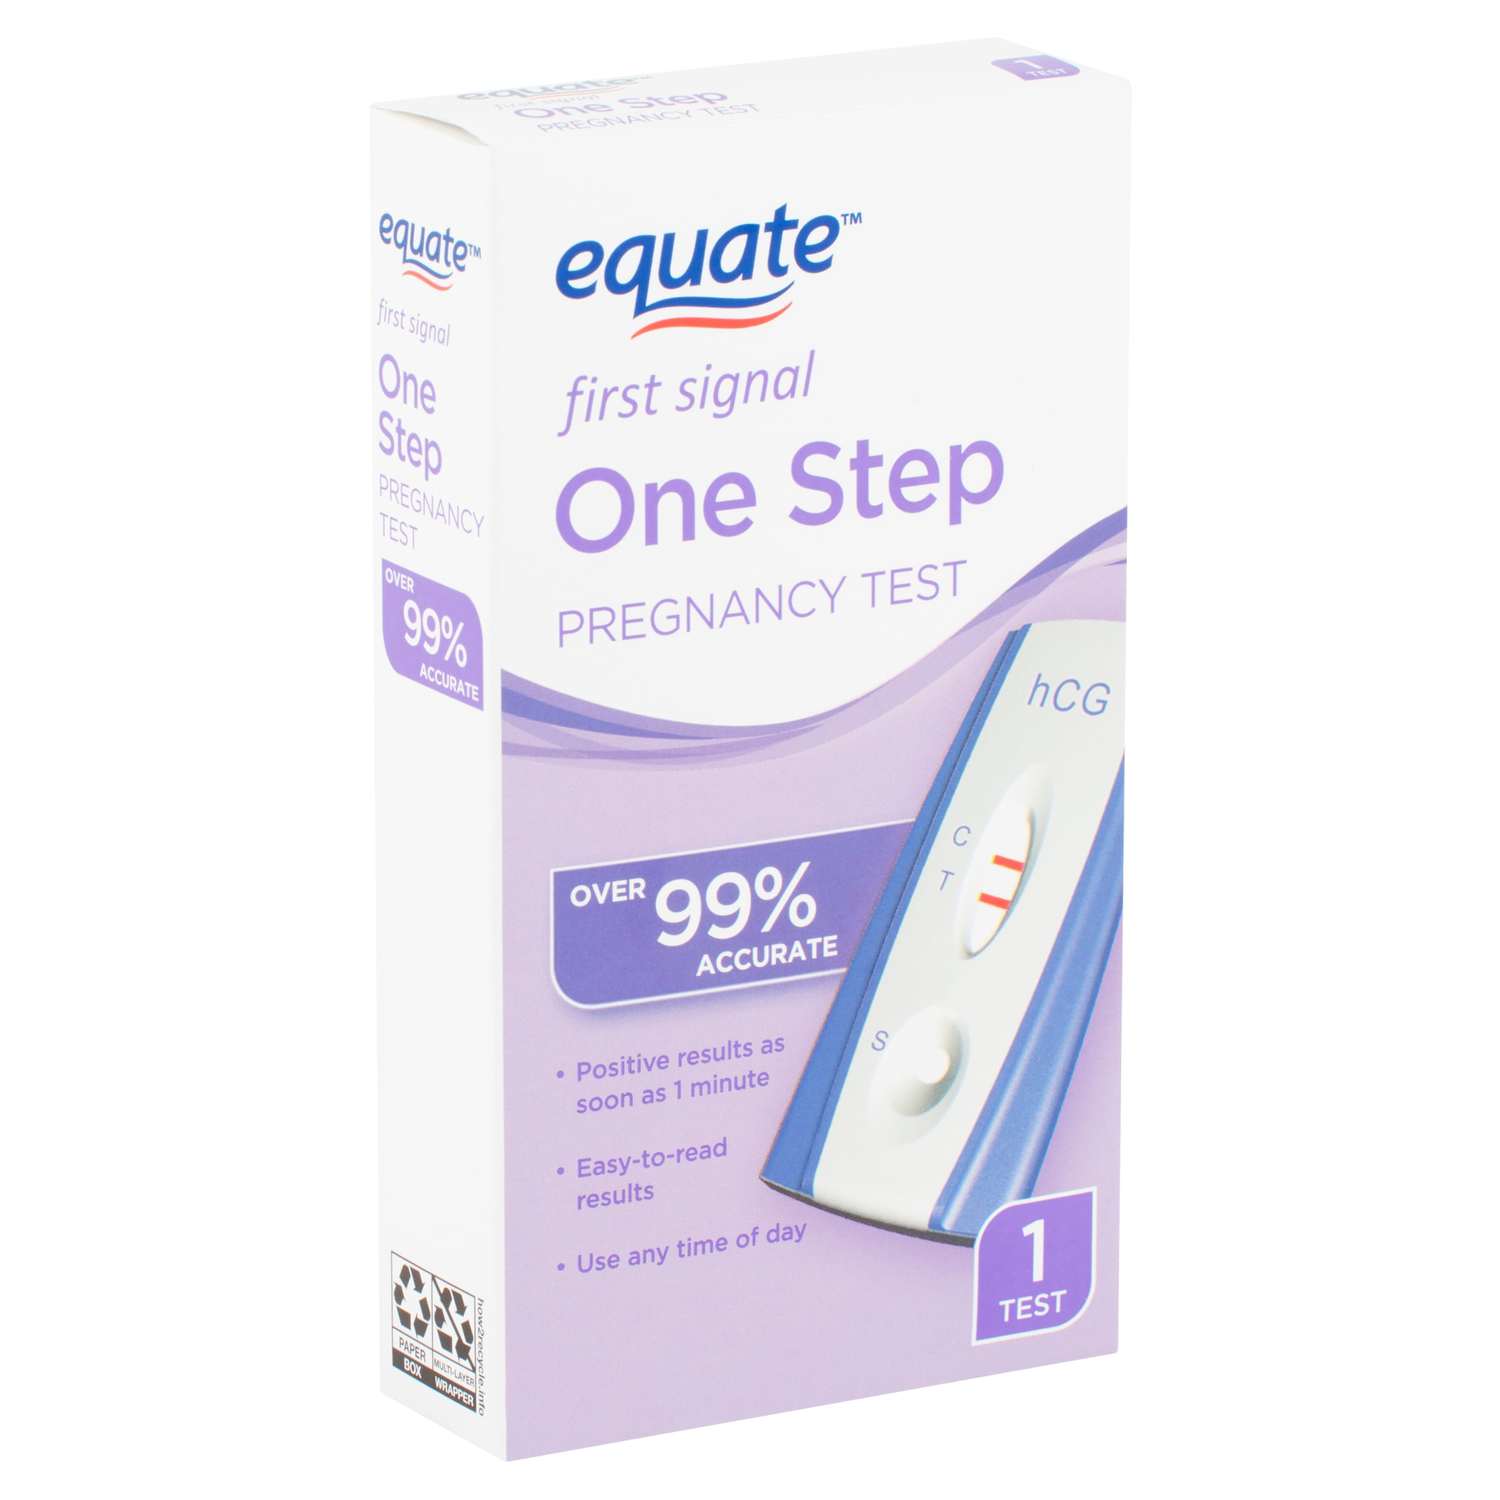 Equate First Signal pregnancy test